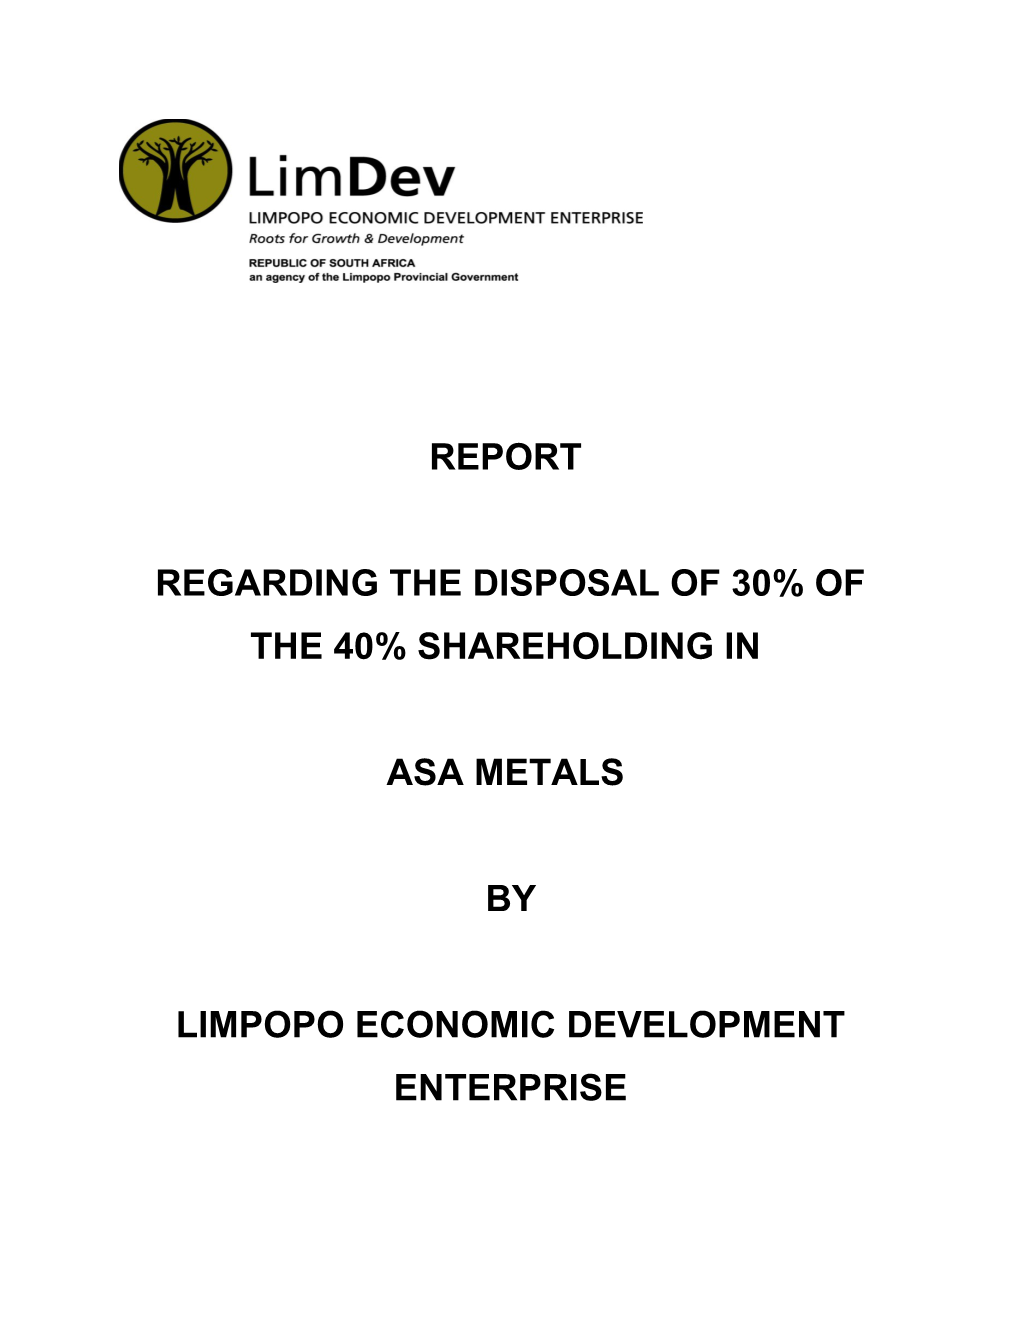 Regarding the Disposal of 30% of the 40% Shareholding In